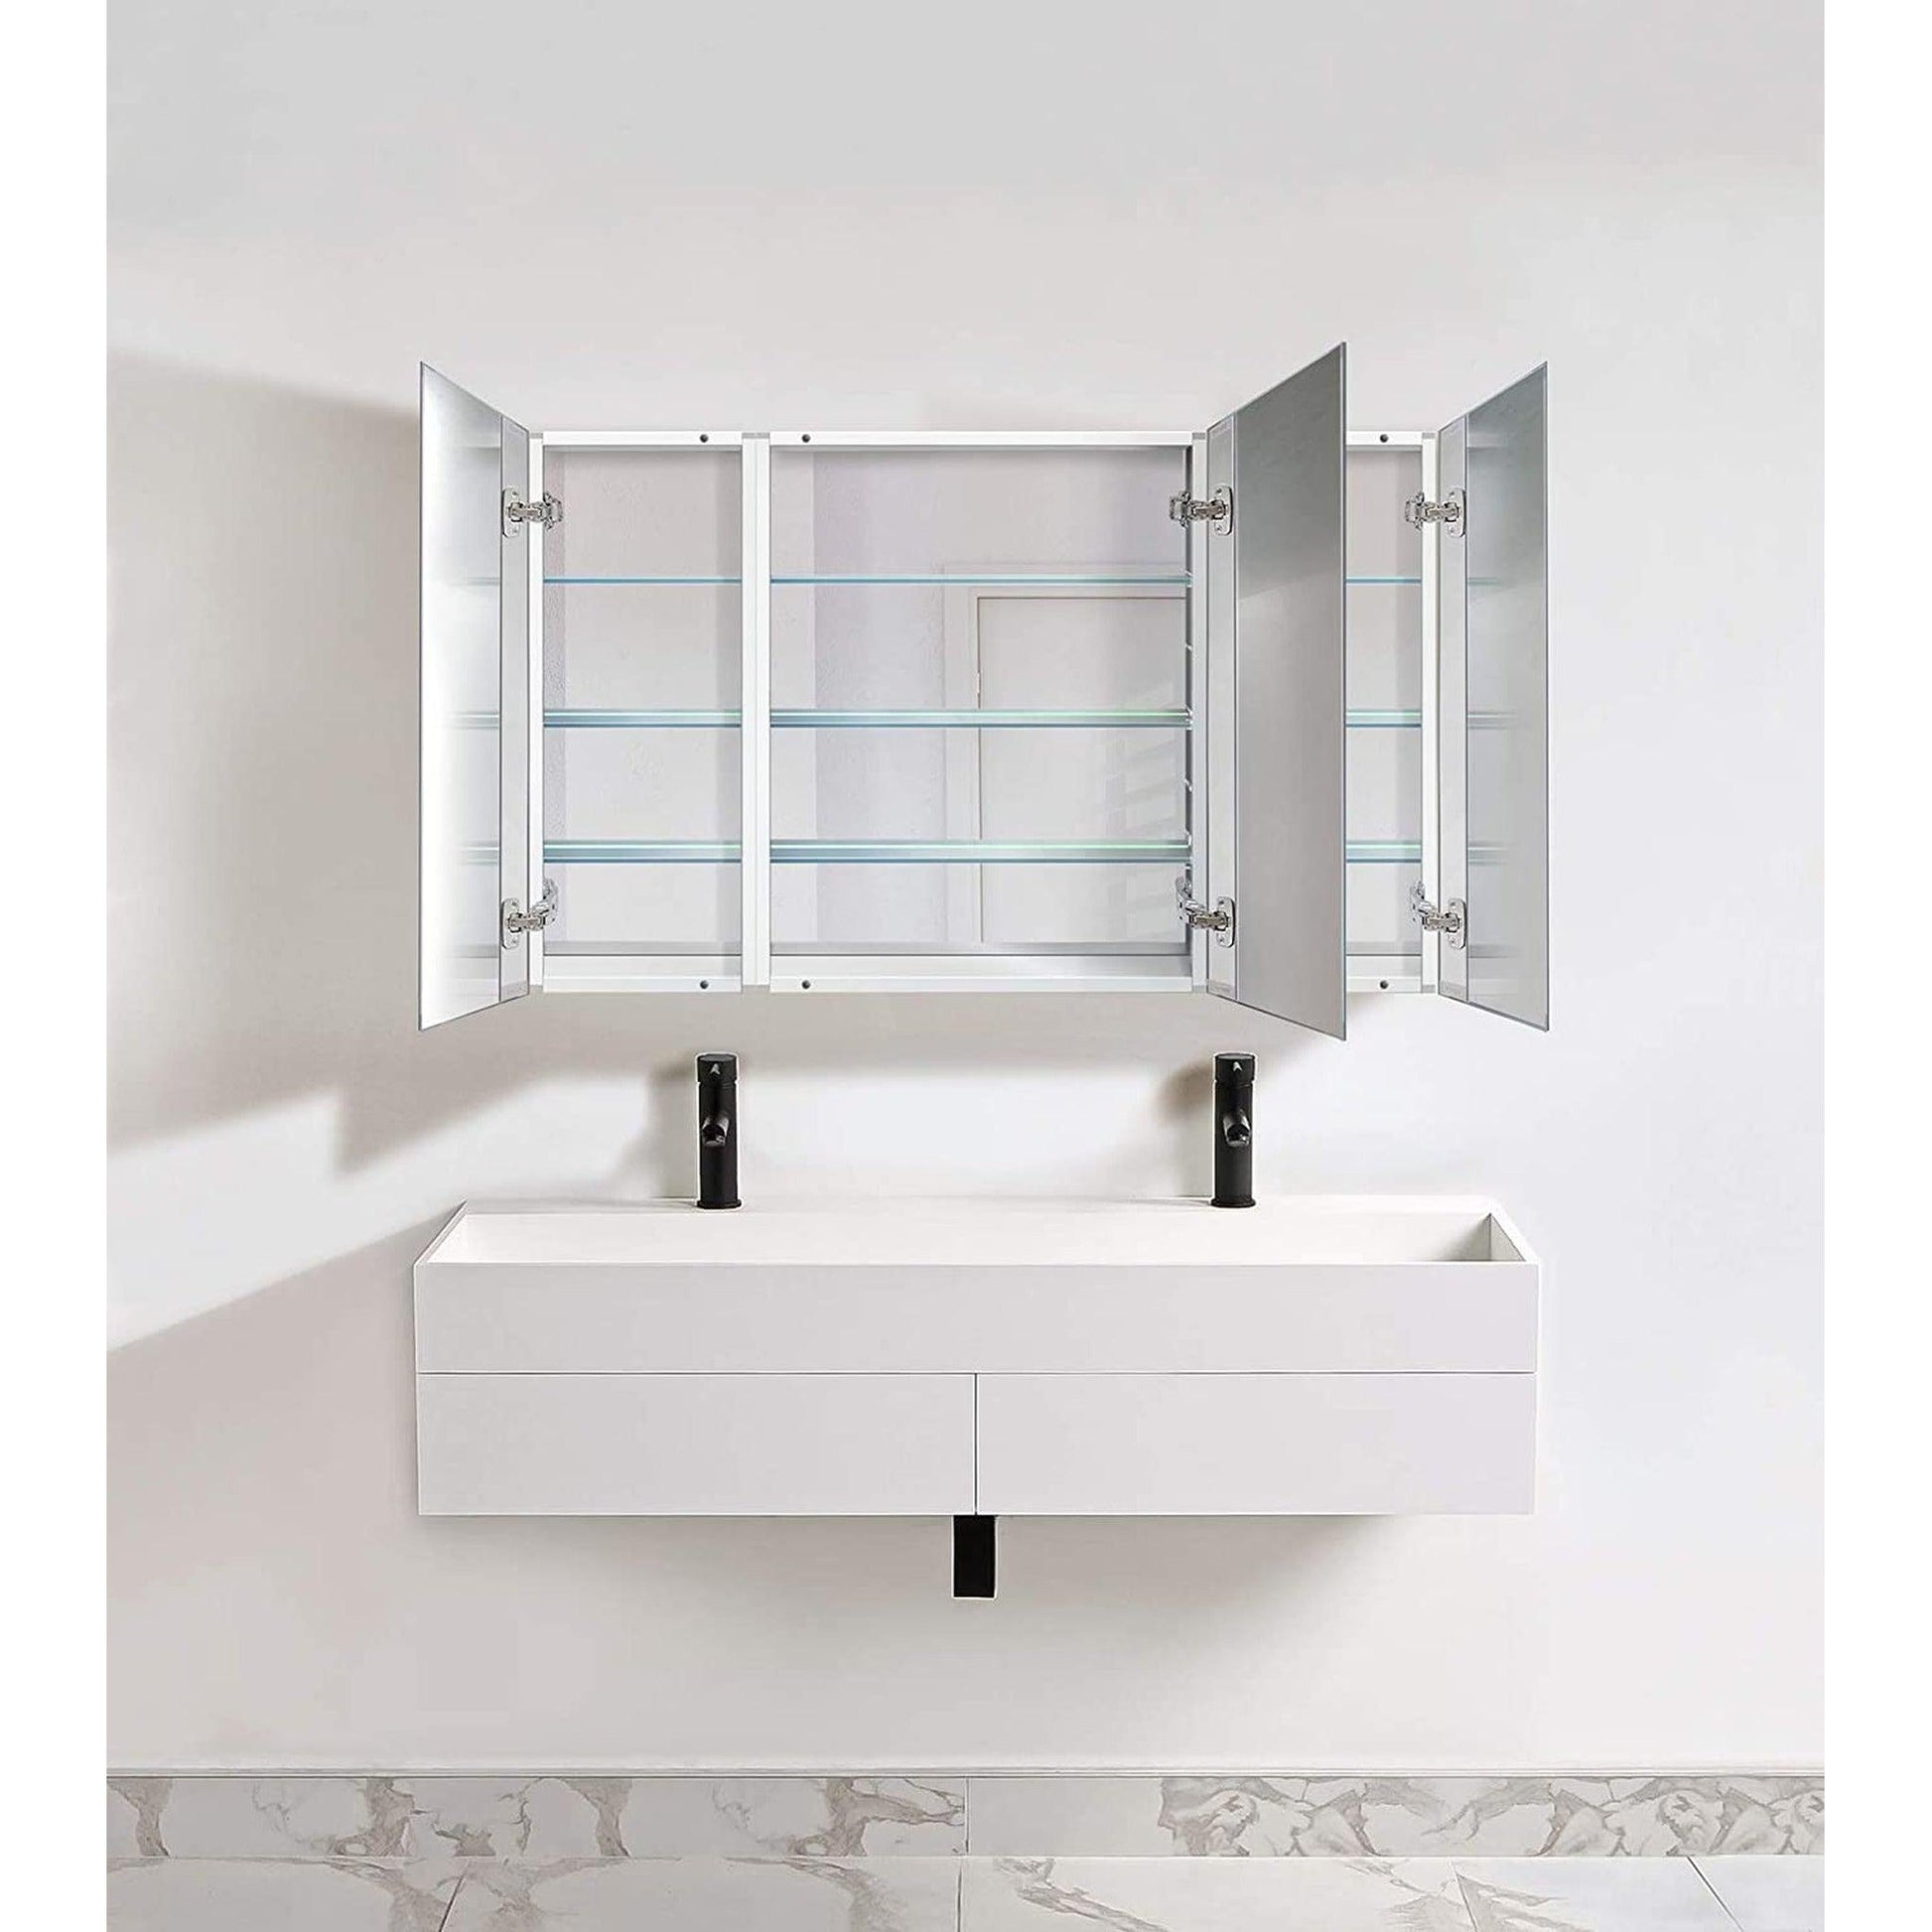 Krugg Reflections Plaza 48" x 30" Tri-View Left-Left-Right Opening Rectangular Recessed/Surface-Mount Medicine Cabinet Mirror